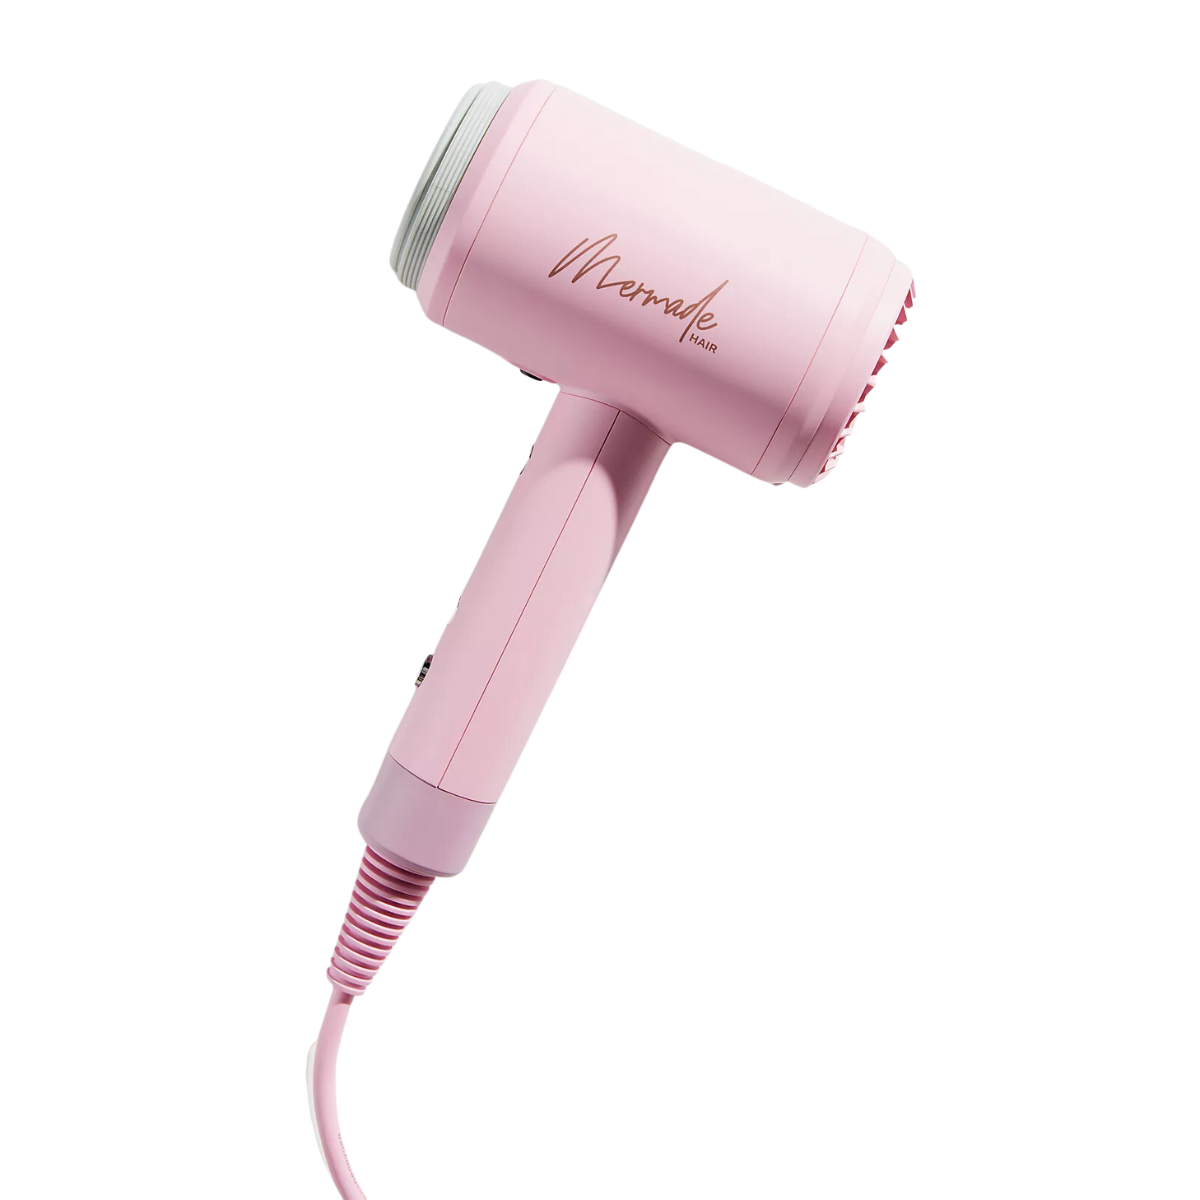 <p>This Australia-founded brand brings us a pint-sized pick that’s both hardworking <em>and</em> too cute to handle. It uses ionic ceramic technology for smoother, straighter hair, plus has two speed settings and two airflow settings, as well as a cool shot function for minimizing frizz. It also comes with two concentrator attachments.</p> <ul> <li><strong>Pros:</strong> Comes with attachments, cute design, multiple heat and speed settings</li> <li><strong>Cons:</strong> On the heavier side, not dual-voltage</li> <li><strong>Weight:</strong> 1.68 pounds</li> <li><strong>Dual Voltage:</strong> No</li> </ul> <p><em>Save when you shop the best travel hair dryers with these <a href="https://www.glamour.com/coupons/anthropologie?mbid=synd_msn_rss&utm_source=msn&utm_medium=syndication">Anthropologie promo codes</a>.</em></p> $79, Anthropologie. <a href="https://www.anthropologie.com/shop/mermade-hair-compact-hair-dryer?">Get it now!</a><p>Sign up for today’s biggest stories, from pop culture to politics.</p><a href="https://www.glamour.com/newsletter/news?sourceCode=msnsend">Sign Up</a>